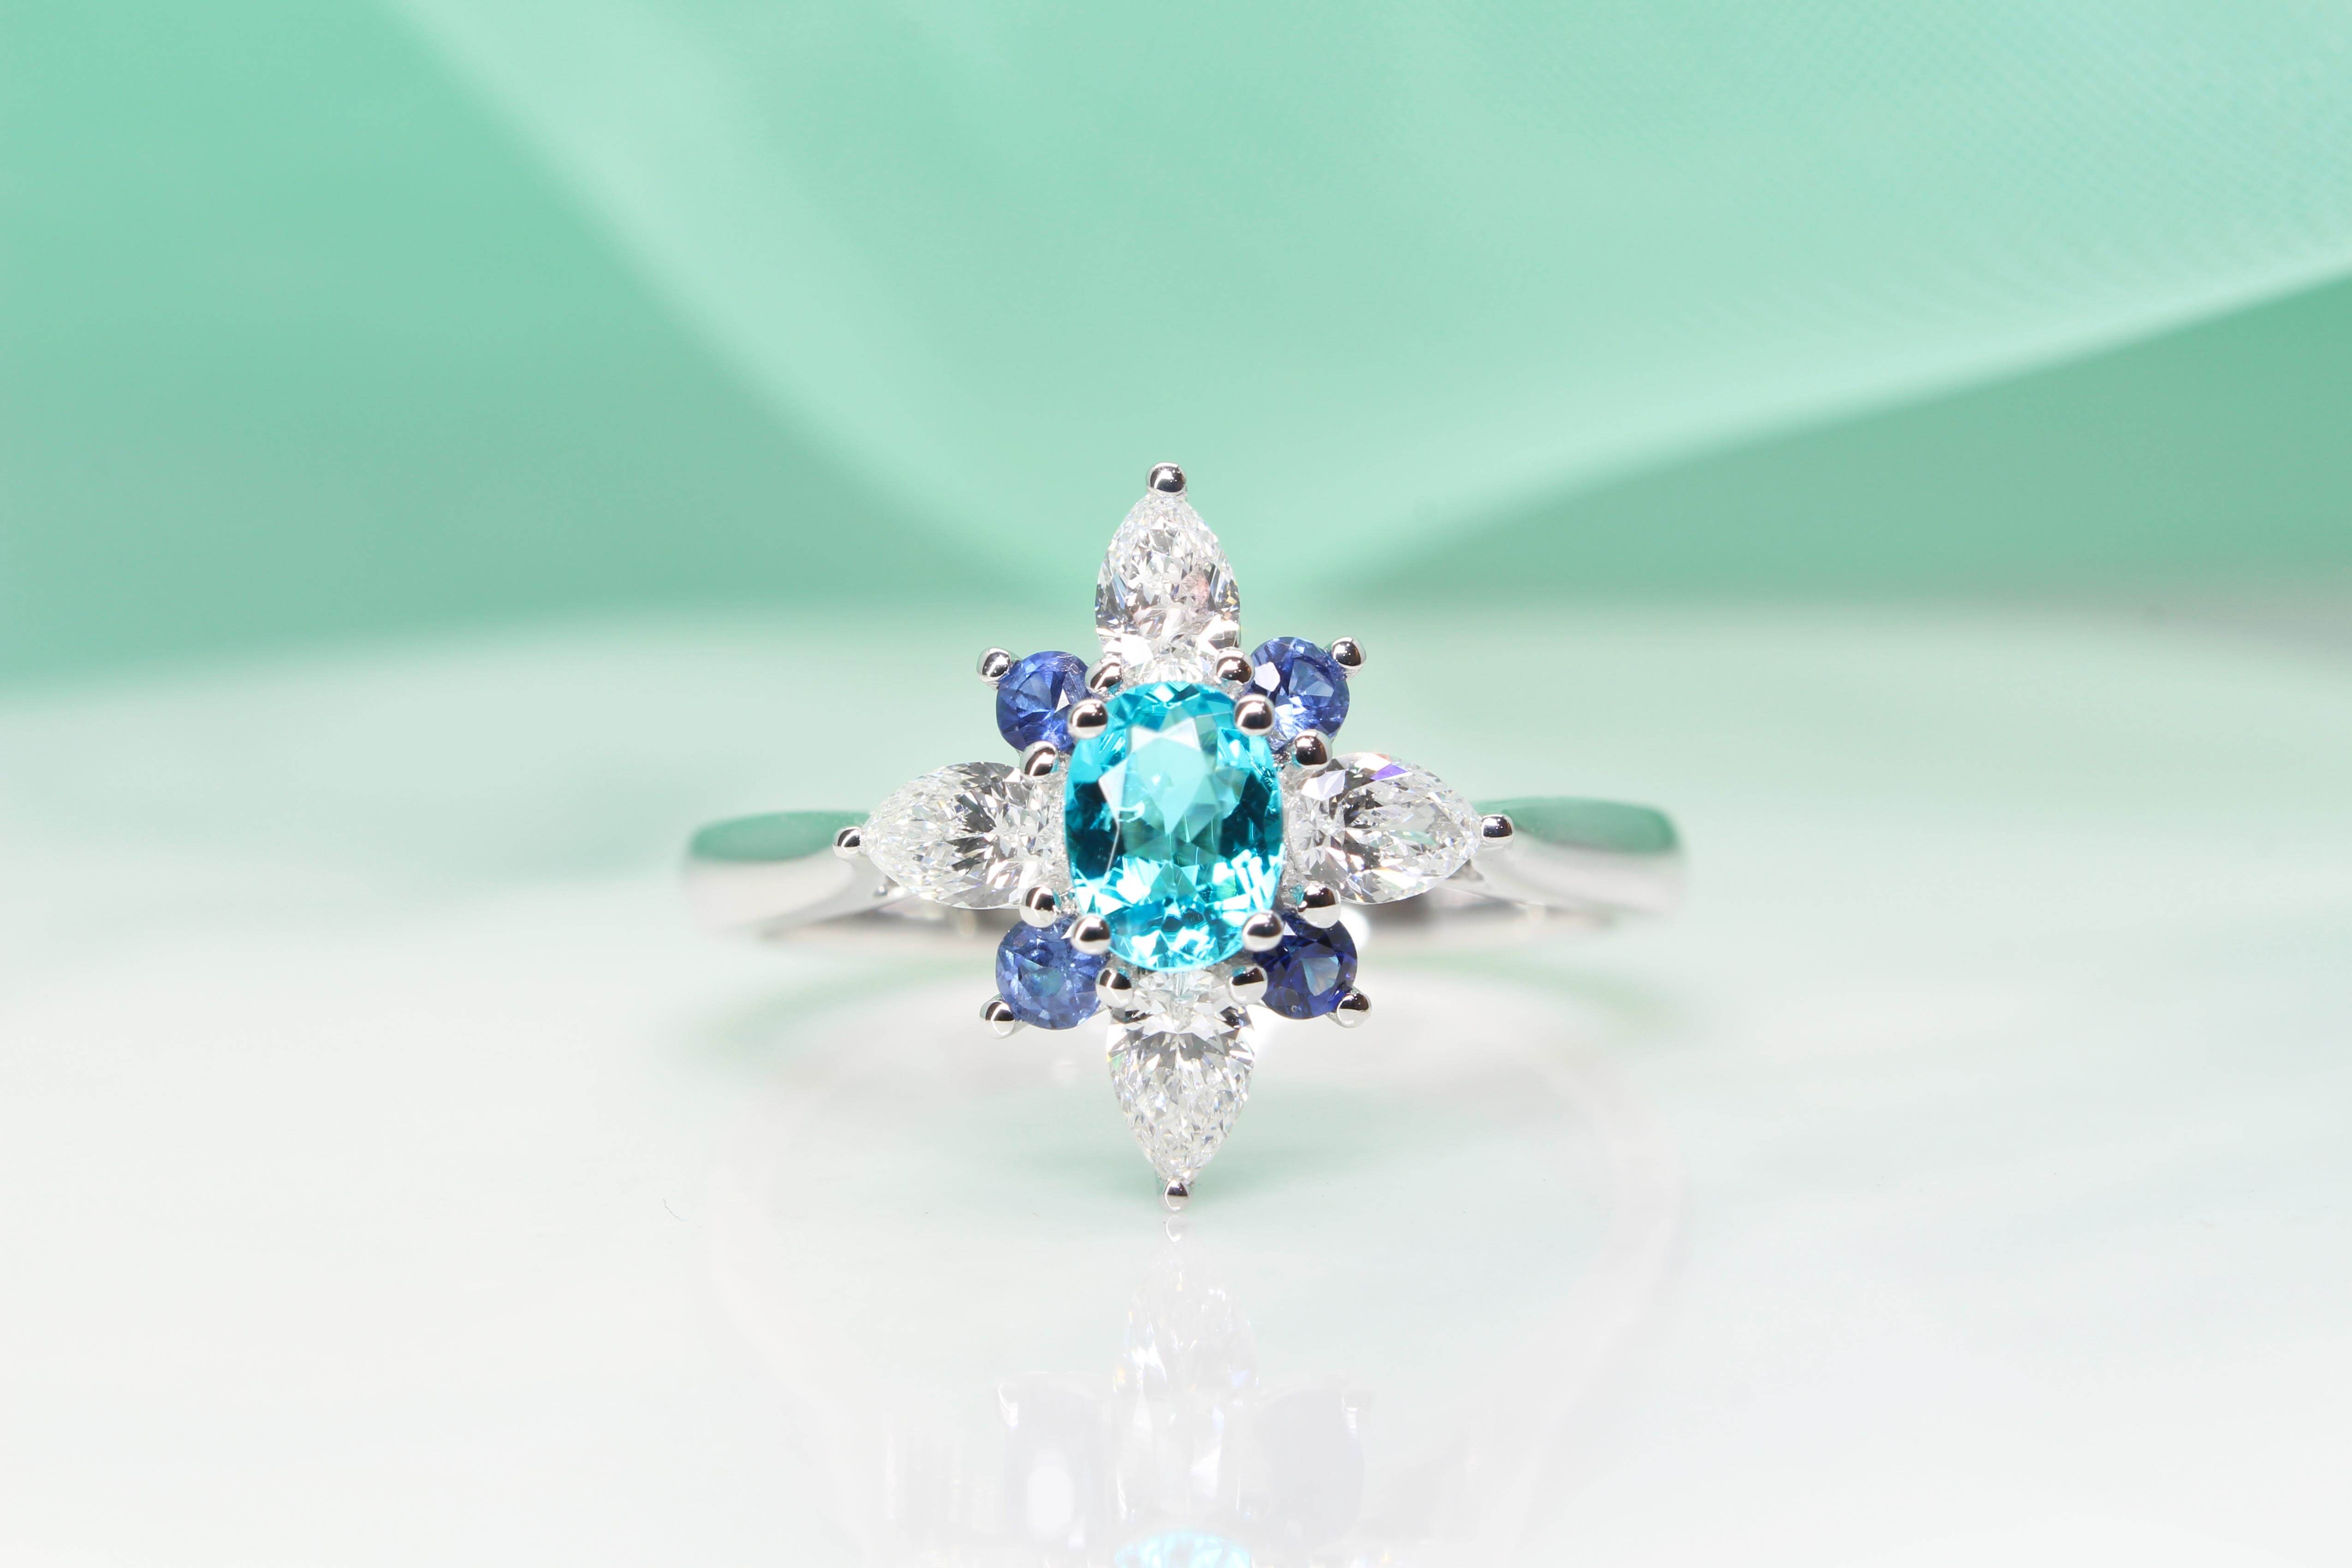 Brazil Paraiba Tourmaline Ring customised and design with pear shaped diamond and round brilliance blue sapphire inspired by a flora design - Customised Engagement Ring with local Singapore bespoke customised jeweller, with Mozambique and Brazil Paraiba